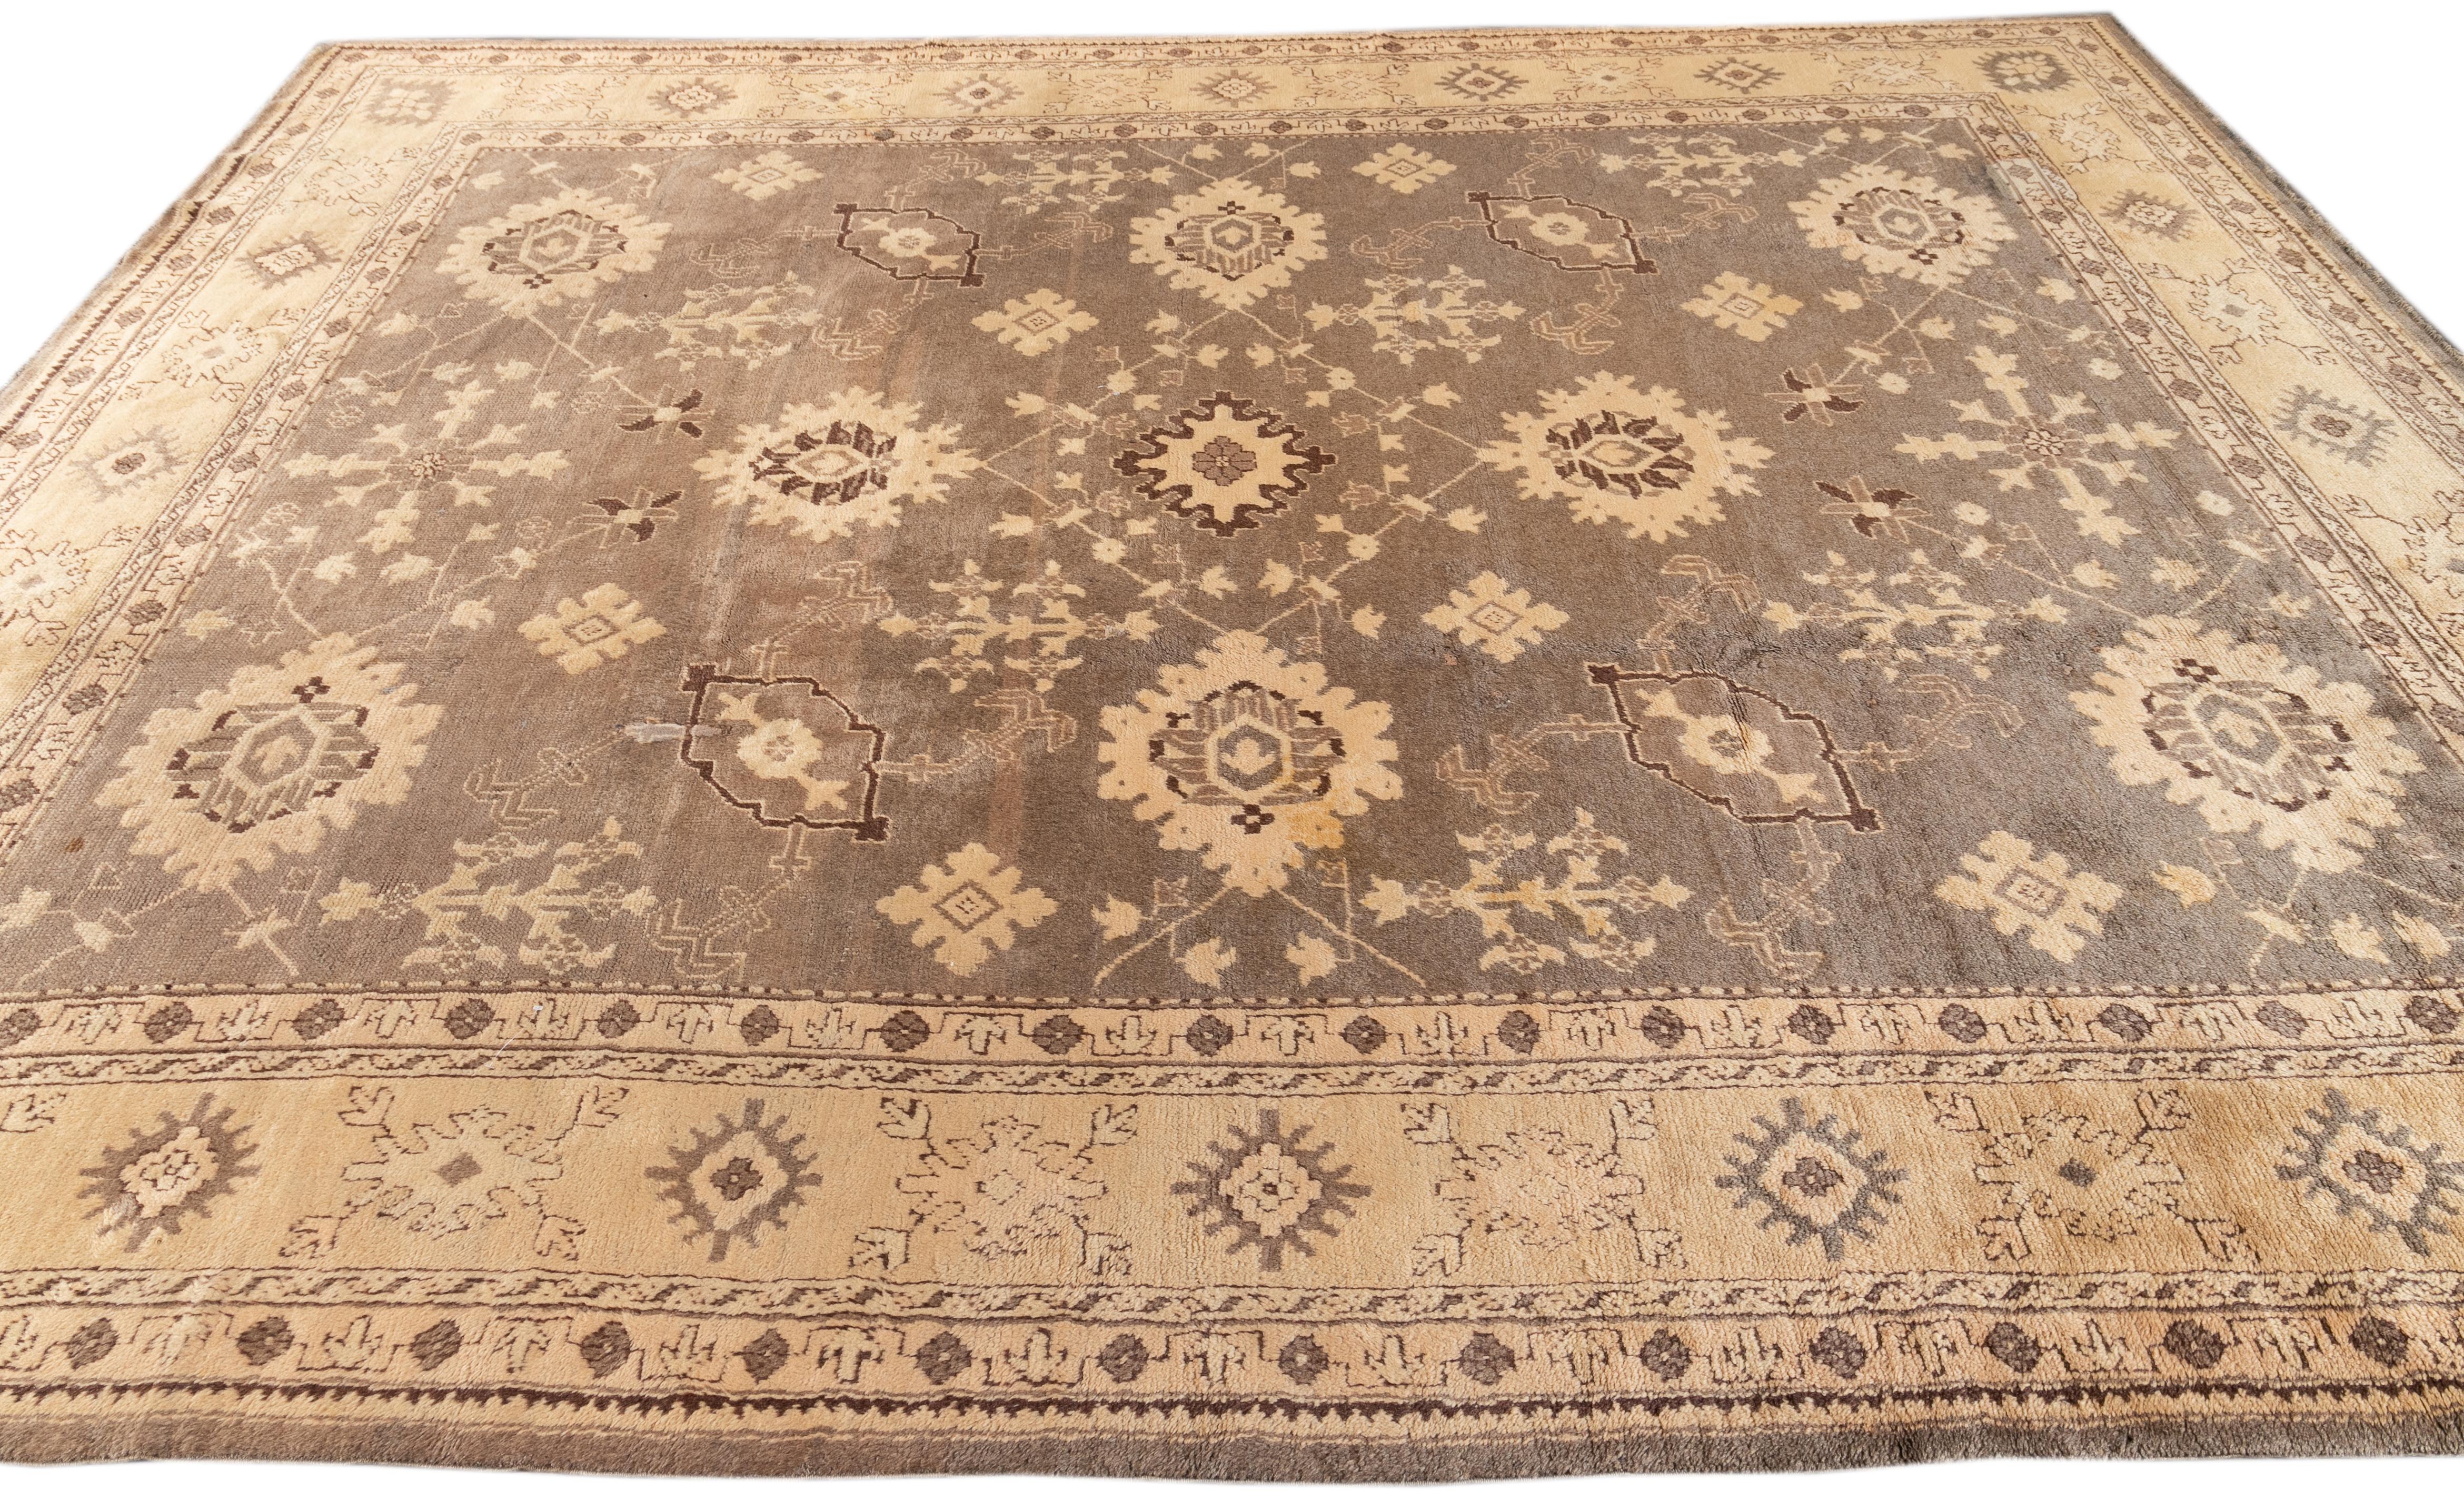 This exceptional antique Style Turkish wool rug features a charming gray color base and is hand-knotted with utmost attention to detail. With stunning beige-tan accents, it displays a captivating floral pattern that is alluring to any décor.

This